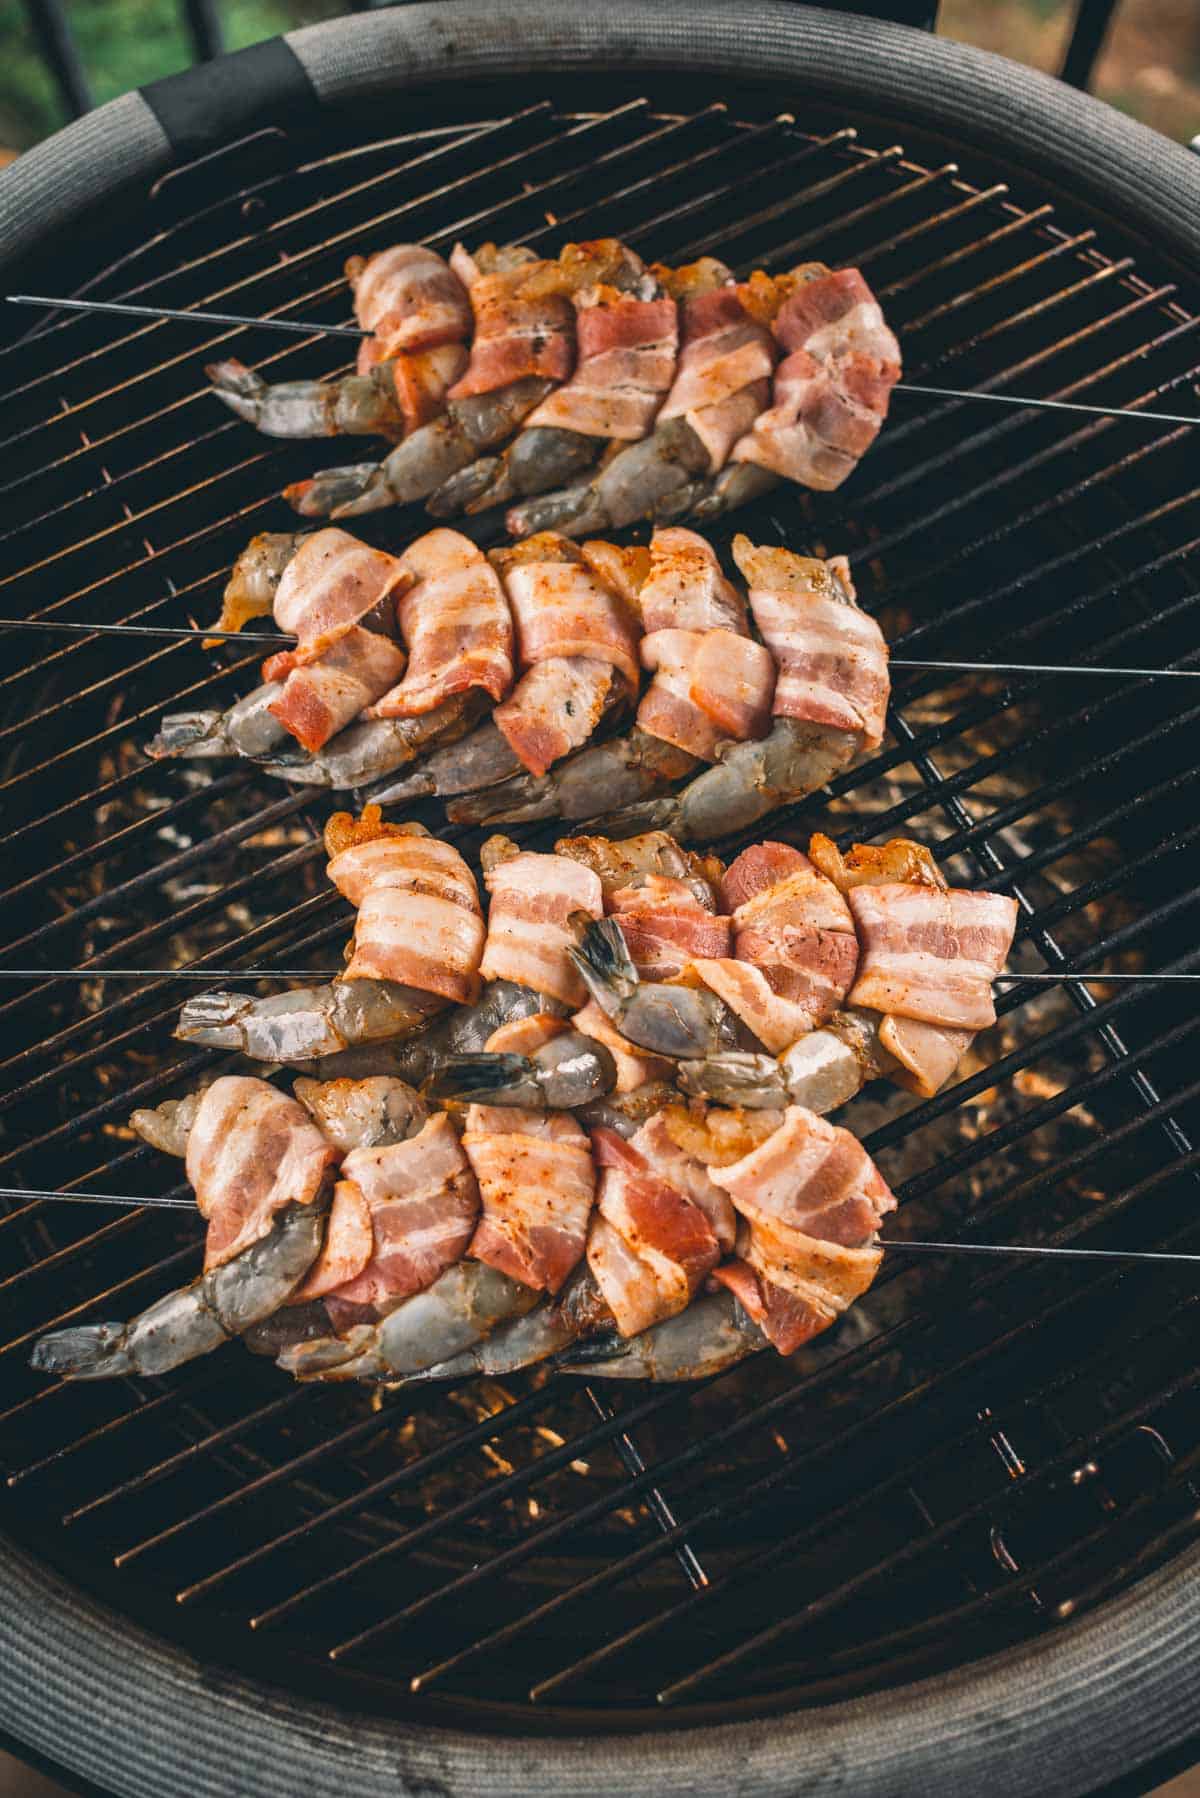 Skewers of shrimp wrapped in bacon are being grilled on a barbecue grill.